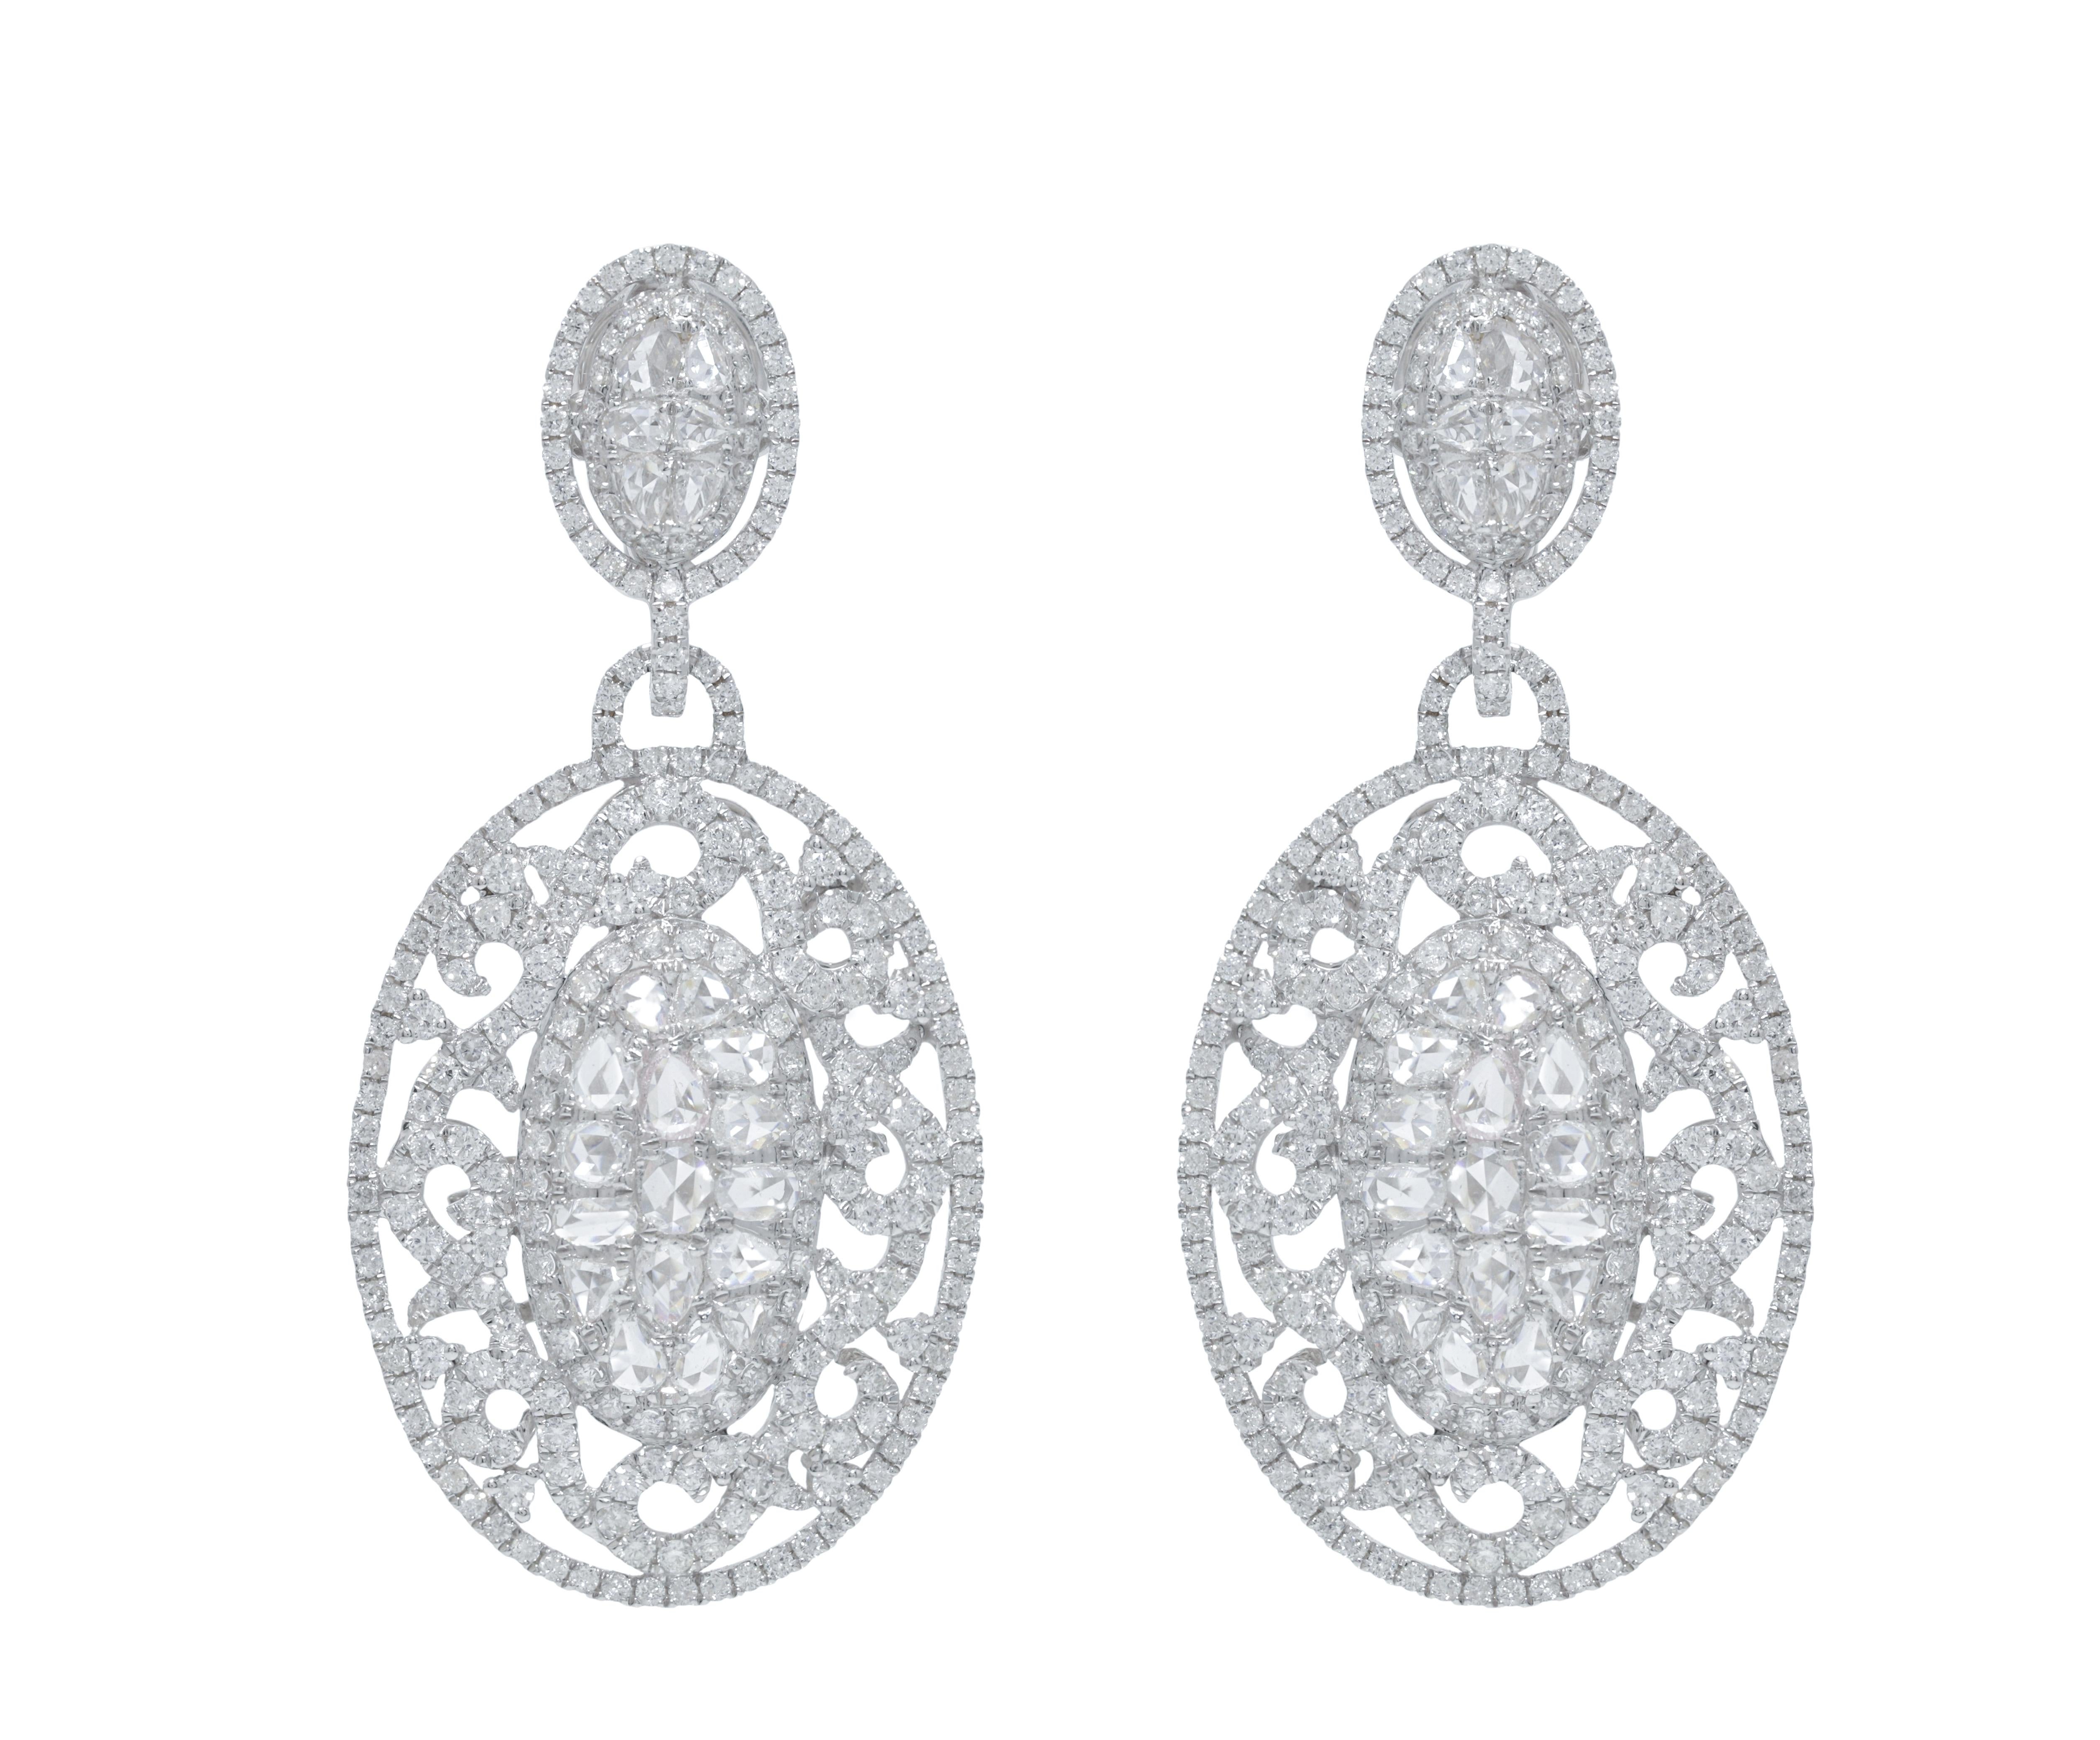 18K White Gold Diamond Earrings featuring 9.42 Carat T.W. of Natural Diamonds

Underline your look with this sharp 18K White Gold Diamond Earrings. High quality Diamonds. This Earrings will underline your exquisite look for any occasion.

. is a